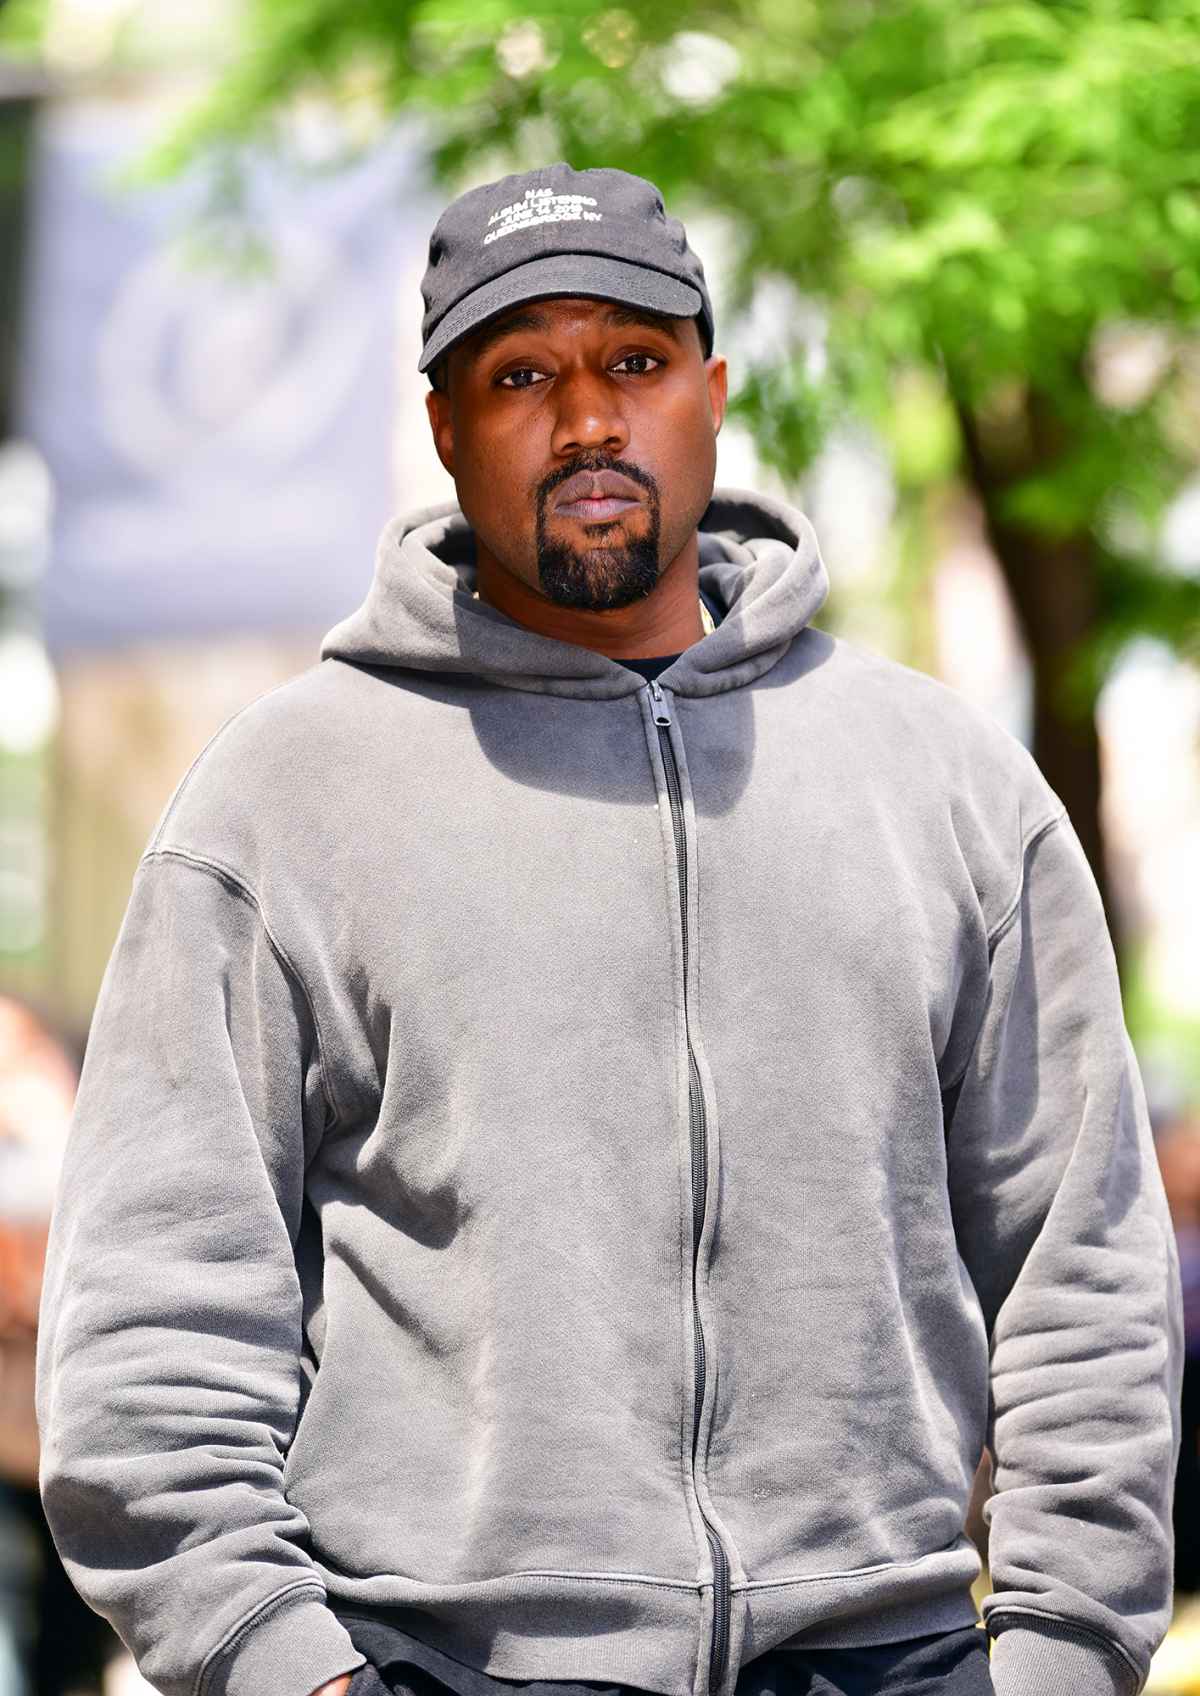 X X X Girls Boys - Kanye West: 'I Still Look at Pornhub' After Having Daughters